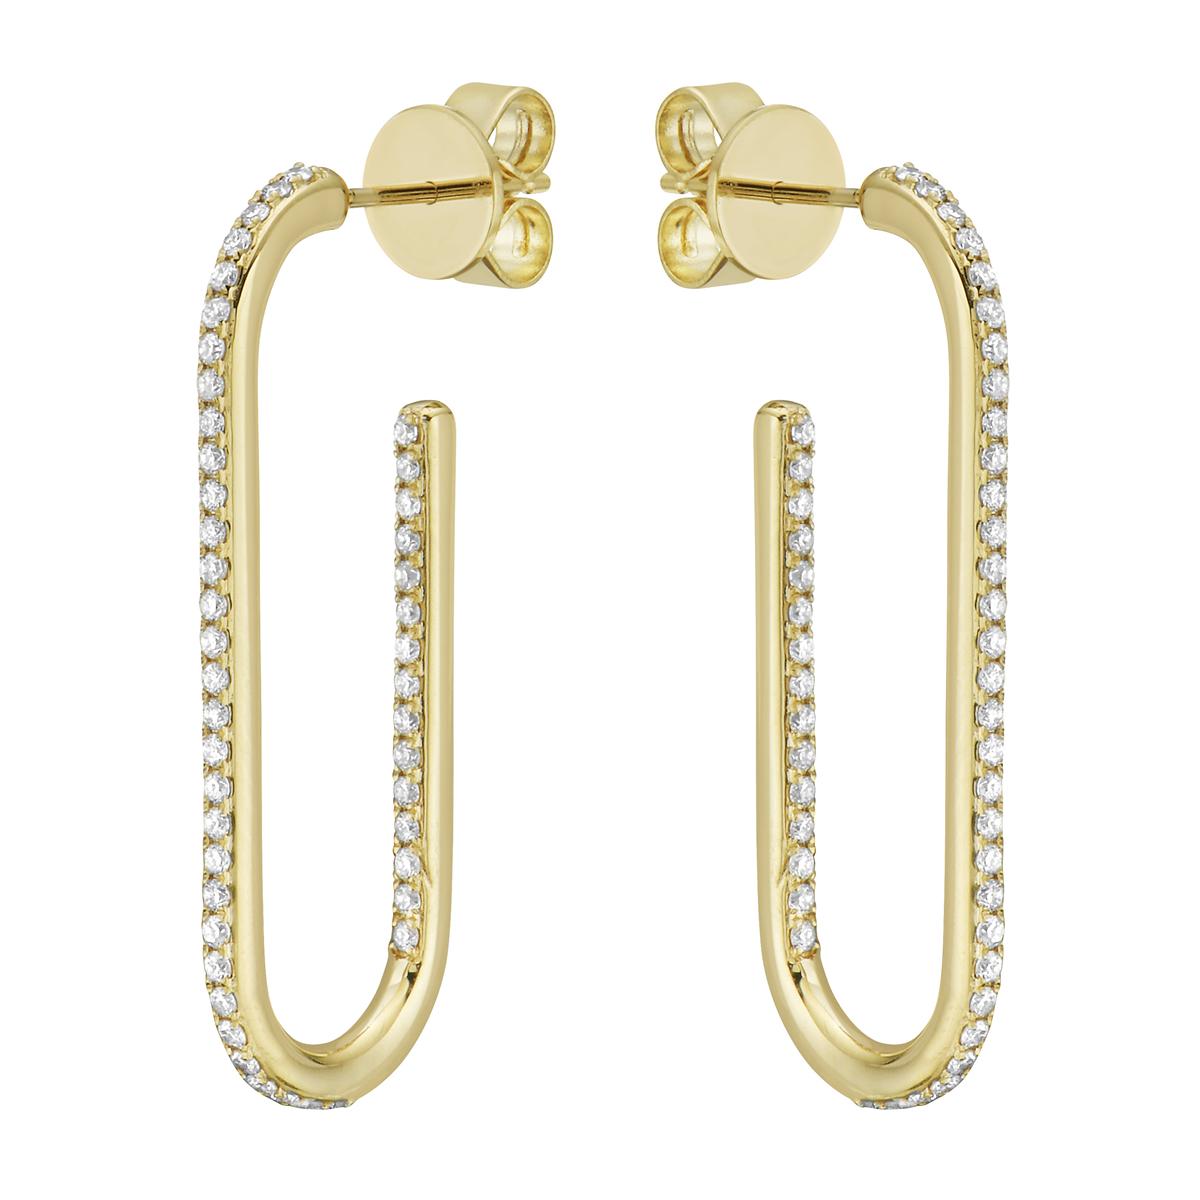 These hoops are the classic and timeless. They are made from 5.6 grams of 18 karat yellow gold with a row of diamonds on the outside as well as the inside. The 92 diamonds are VS2, G color and total 0.54 carats. They are secured through the ear with